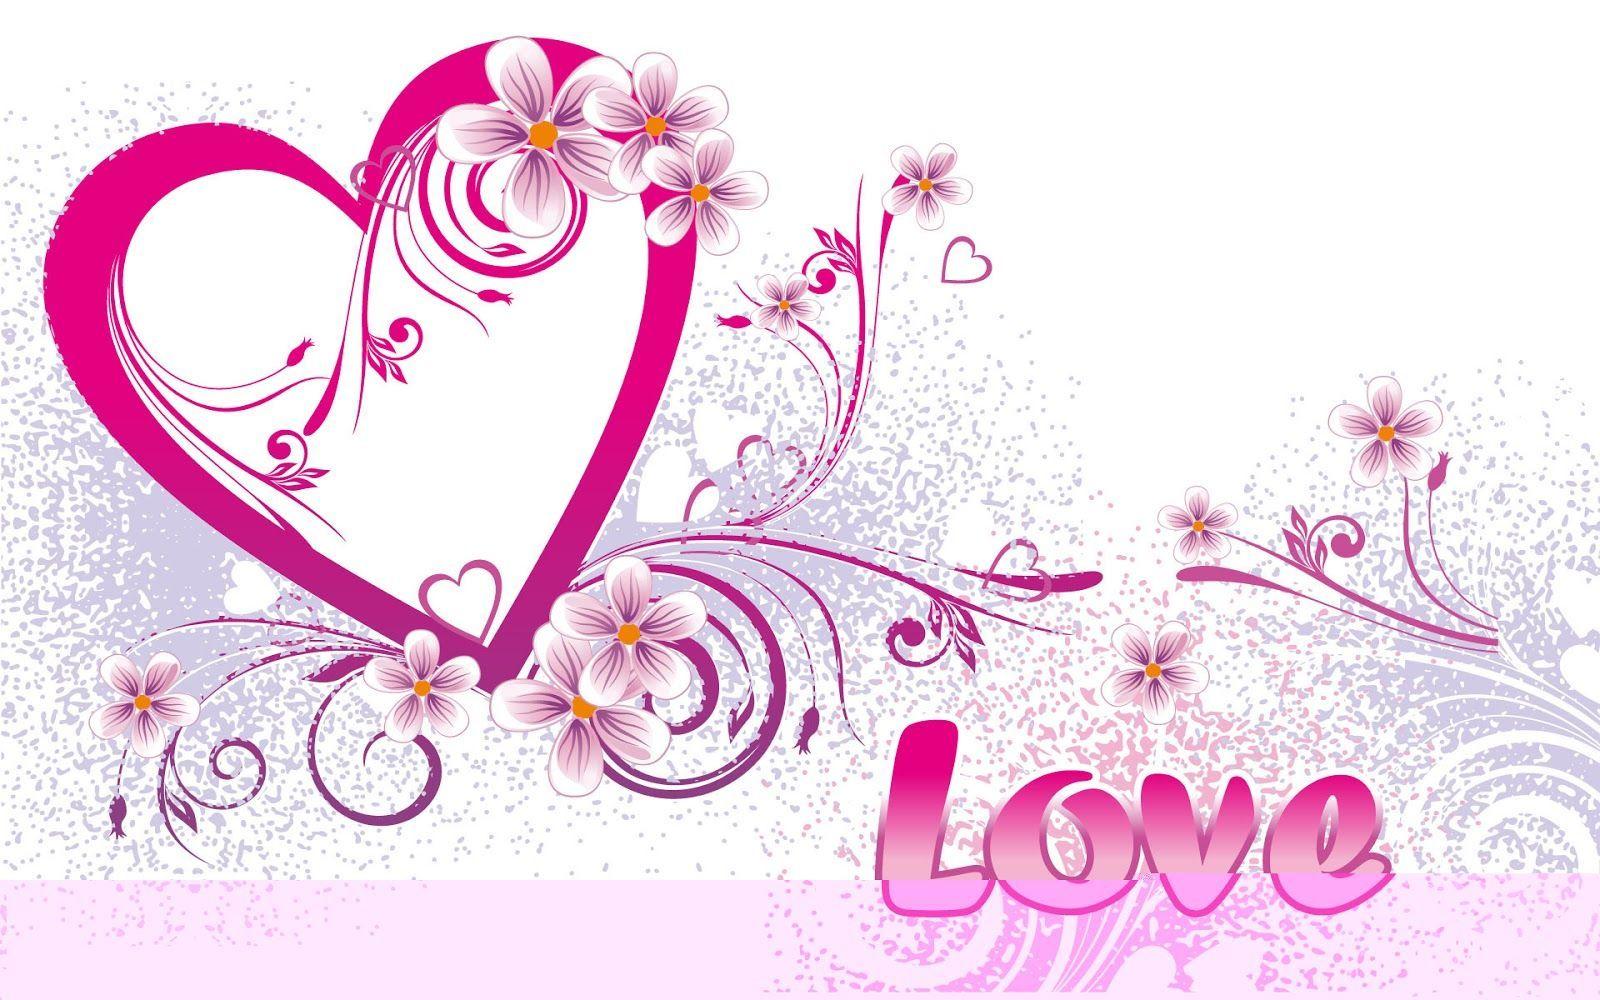 Wallpaper Background: Cute Heart and Love Wallpaper with Different